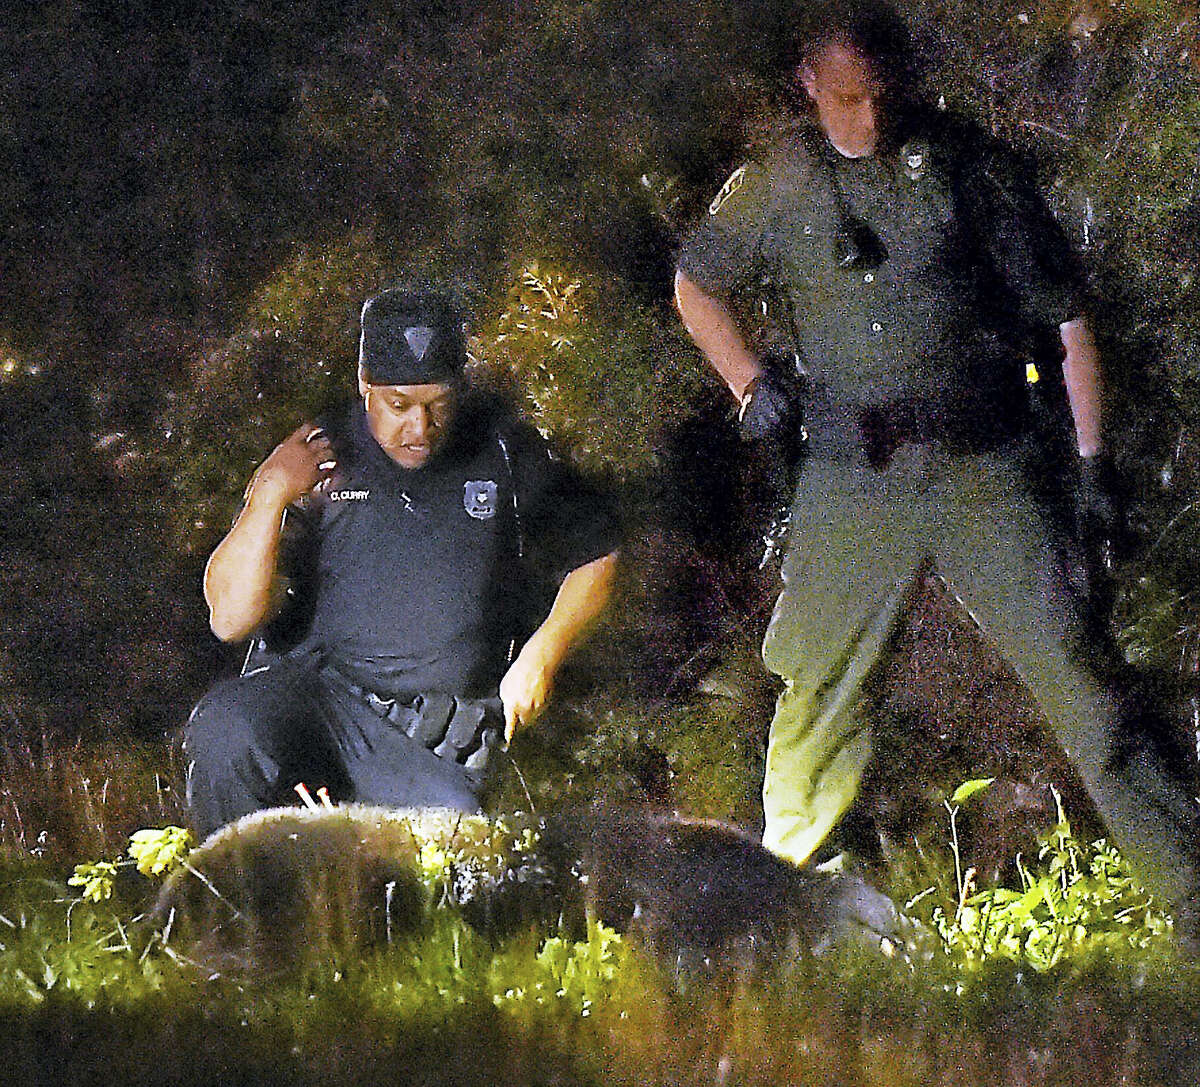 (Catherine Avalone - New Haven Register) New Haven police officer Chad Curry, at left, and Sgt. Steve Stanko gets a closer look at the male black bear that was captured near Jocelyn Square in New Haven, Tuesday evening, May 10, 2016, after a DEEP officer fired a tranquelizer. The black bear weighing approximately 350 to 400 lbs. was first sighted in the backyard of a Wallace Street resident between 5:30 and 6 p.m. and was relocated to a less-populated area.